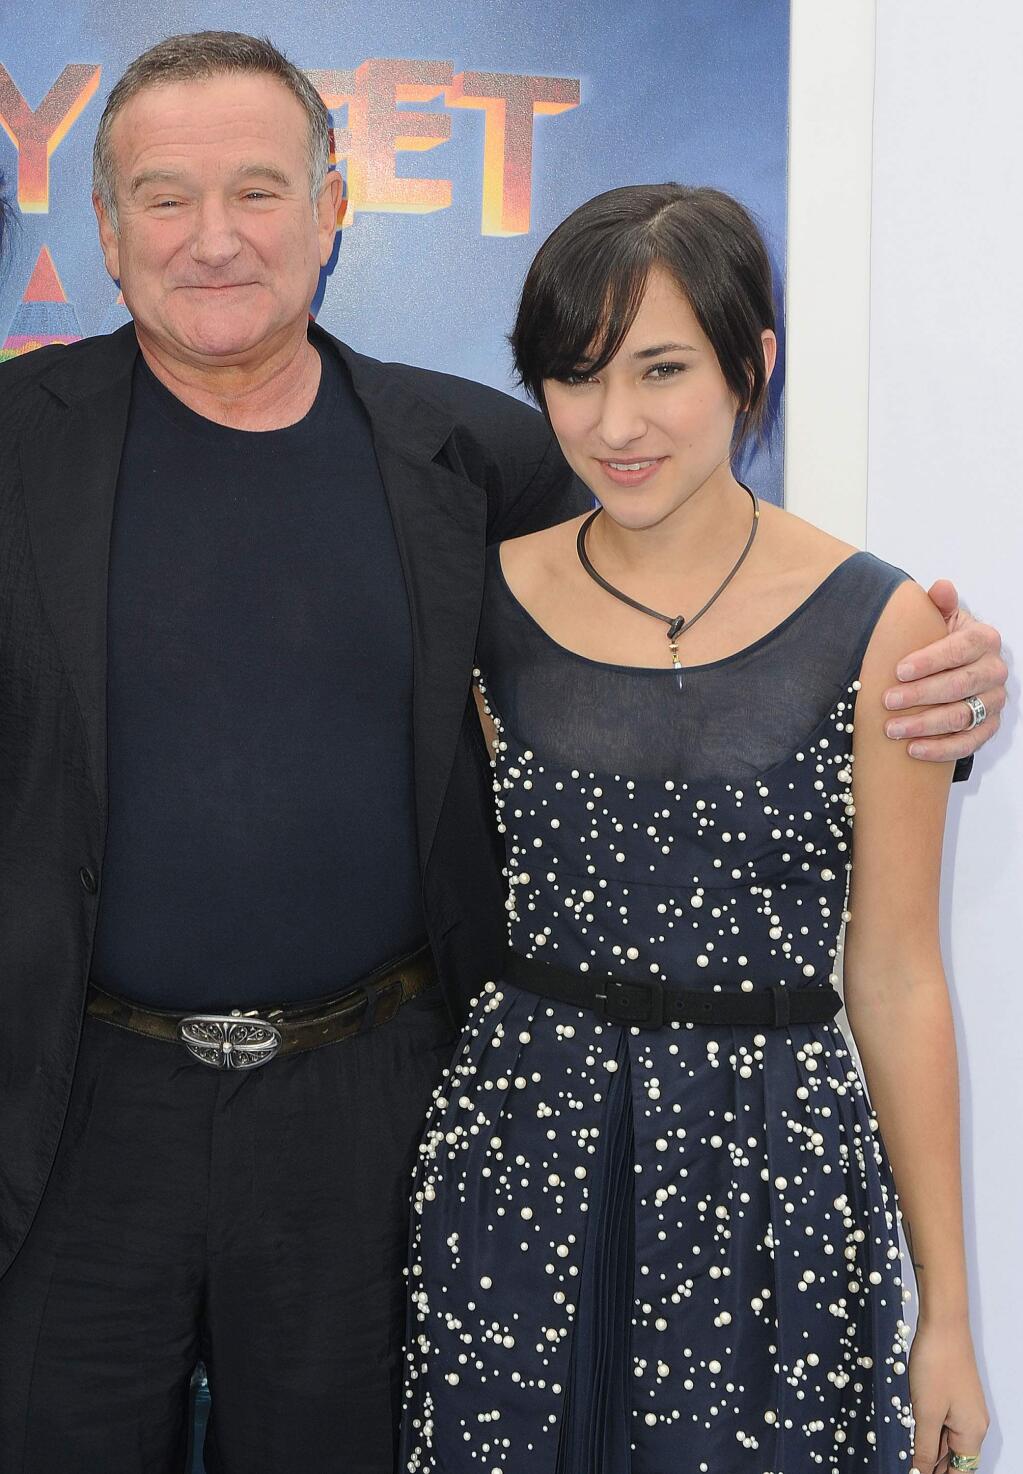 This Nov. 13, 2011 file photo shows actor Robin Williams, left, and his daughter, Zelda at the premiere of 'Happy Feet Two' in Los Angeles. (AP Photo/Katy Winn, File)